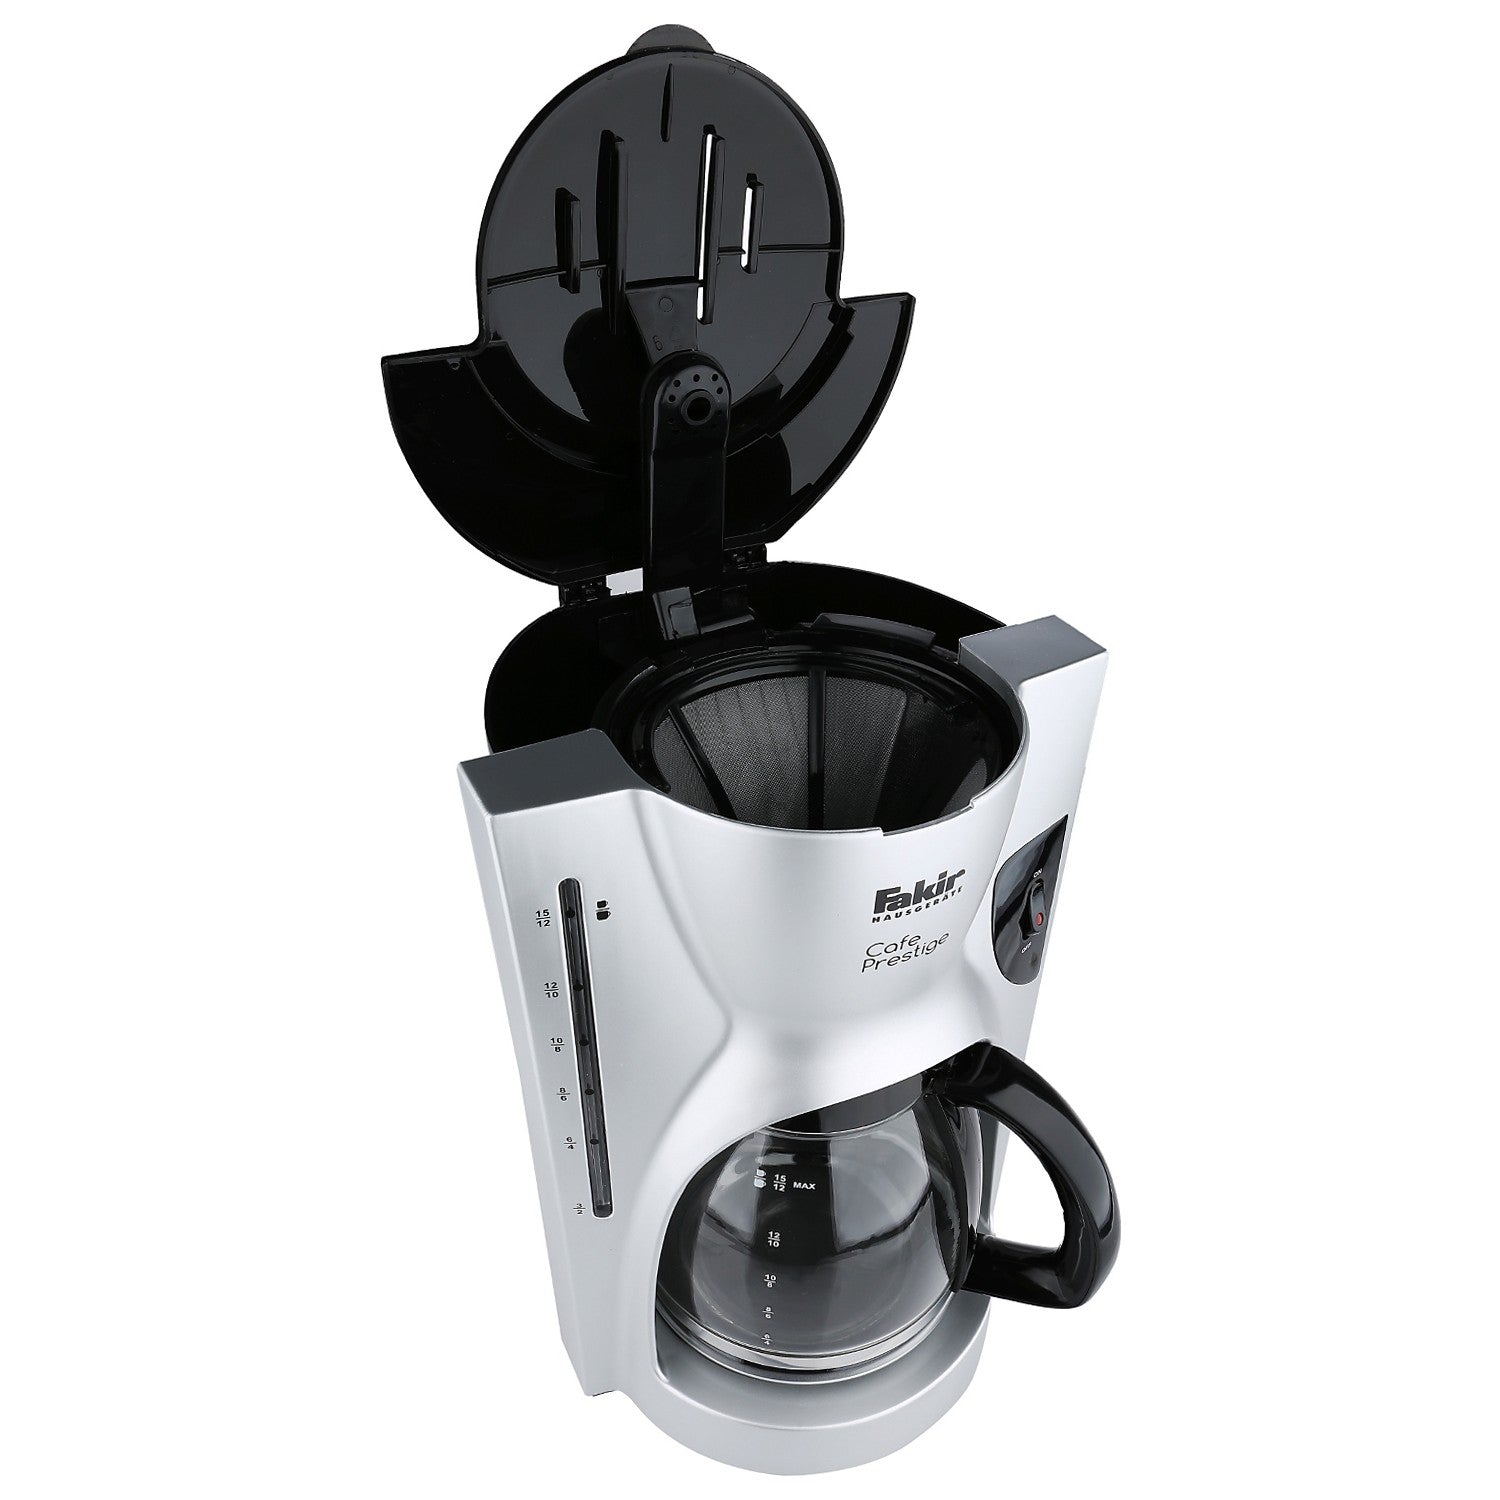 Fakir Coffee maker 900W,12Cups,Keep-warm function,Washable filter,White